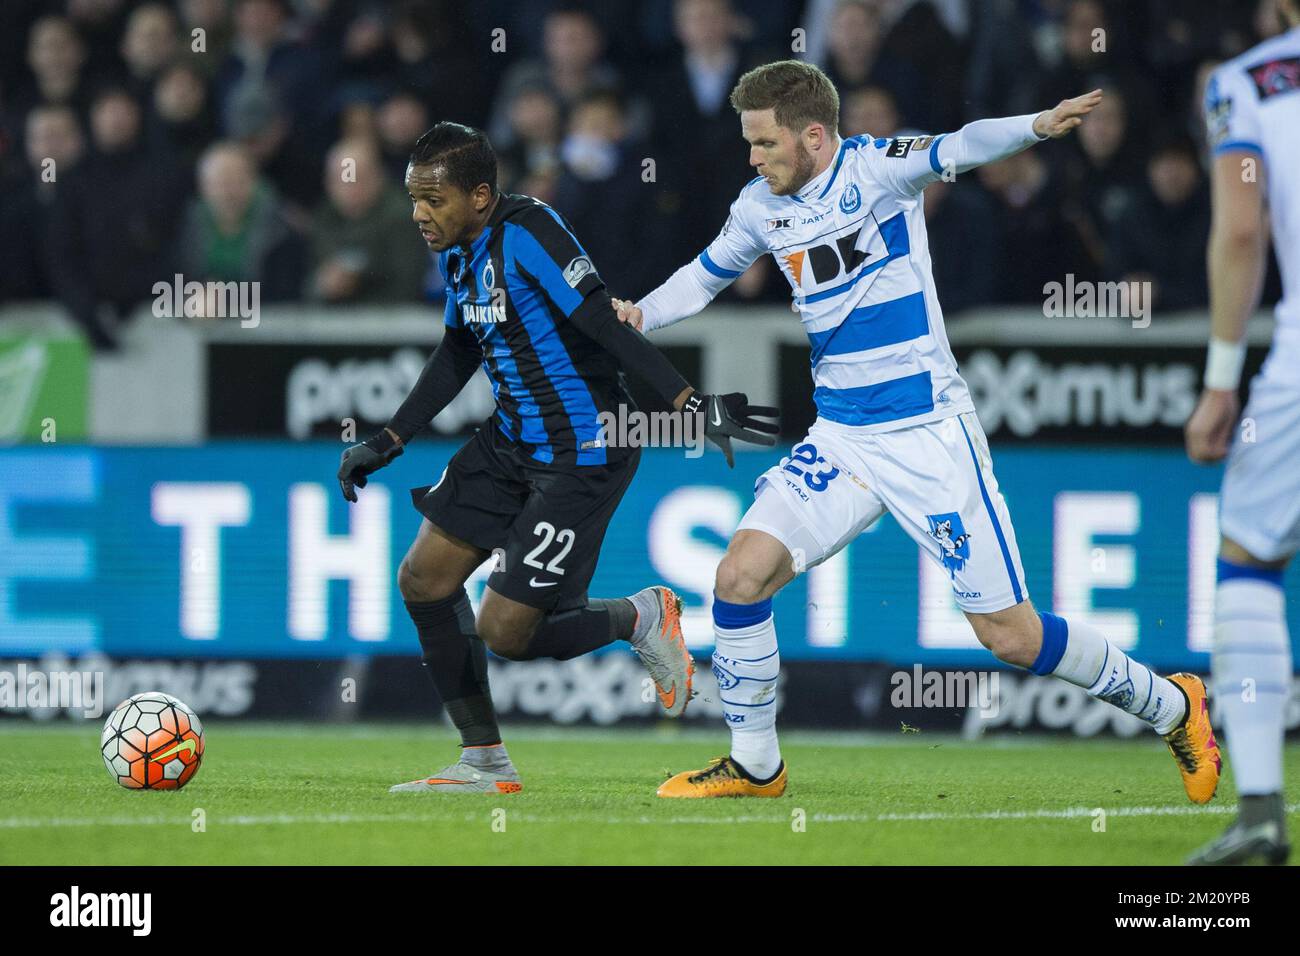 20160203 - BRUGGE, BELGIUM: Club's Jose Izquierdo and Gent's Lasse Nielsen  fight for the ball during the Croky Cup return leg 1/2 final game between  Club Brugge and KAA Gent in Brugge,